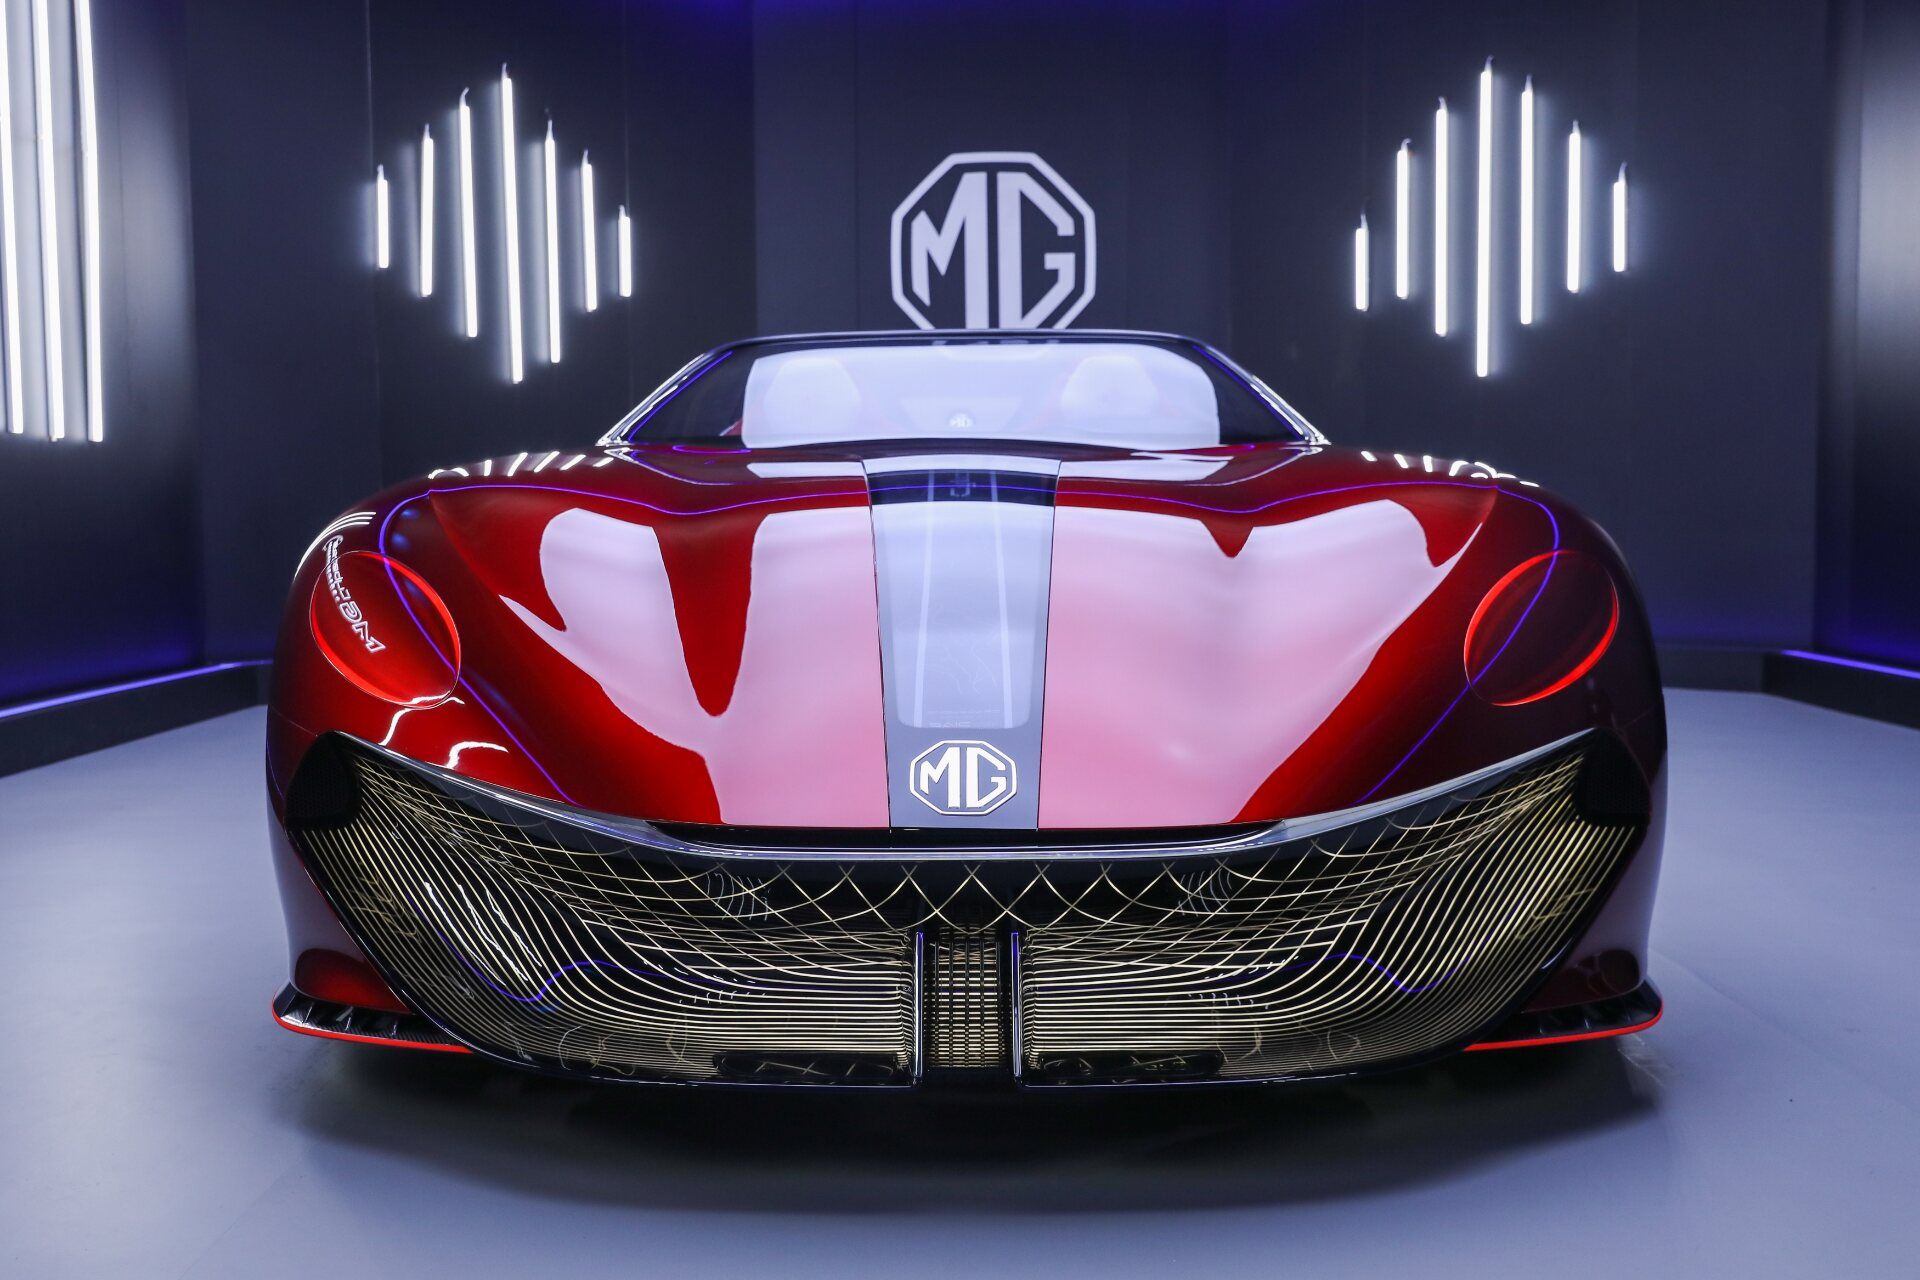 MG Cyberster in red front view with MG logo background